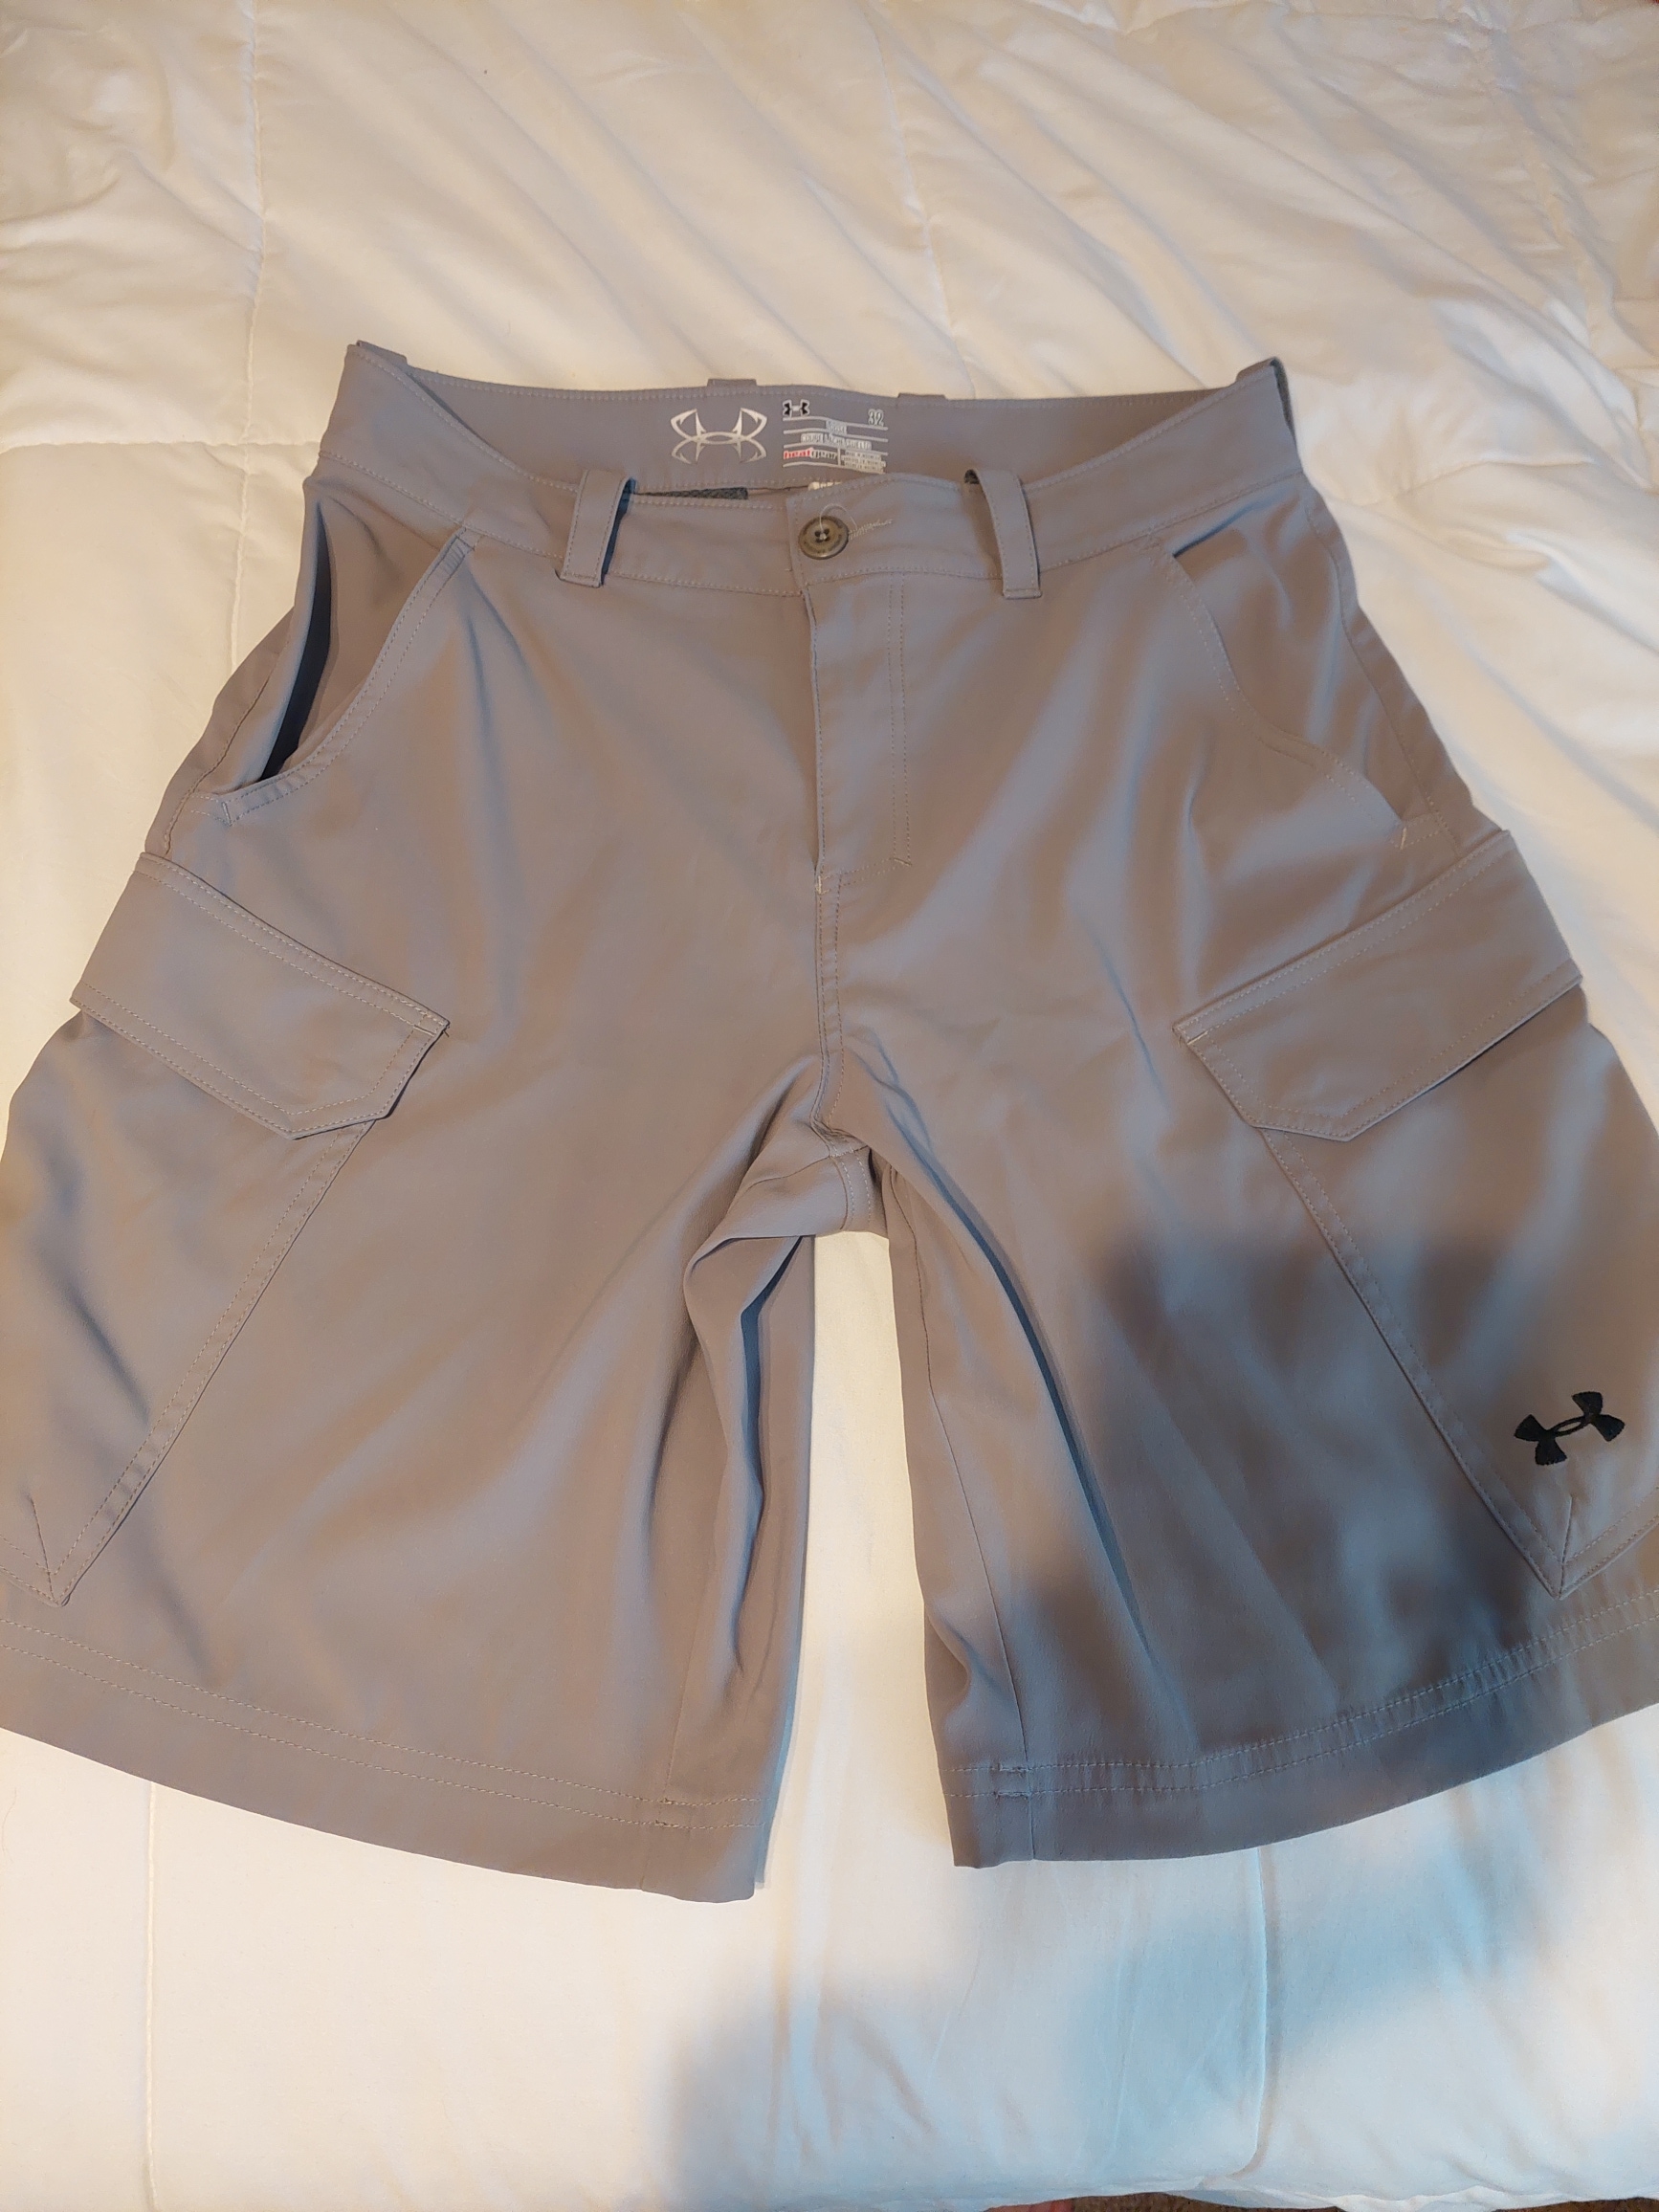 Mens Size 32 Under Armour Golf Shorts